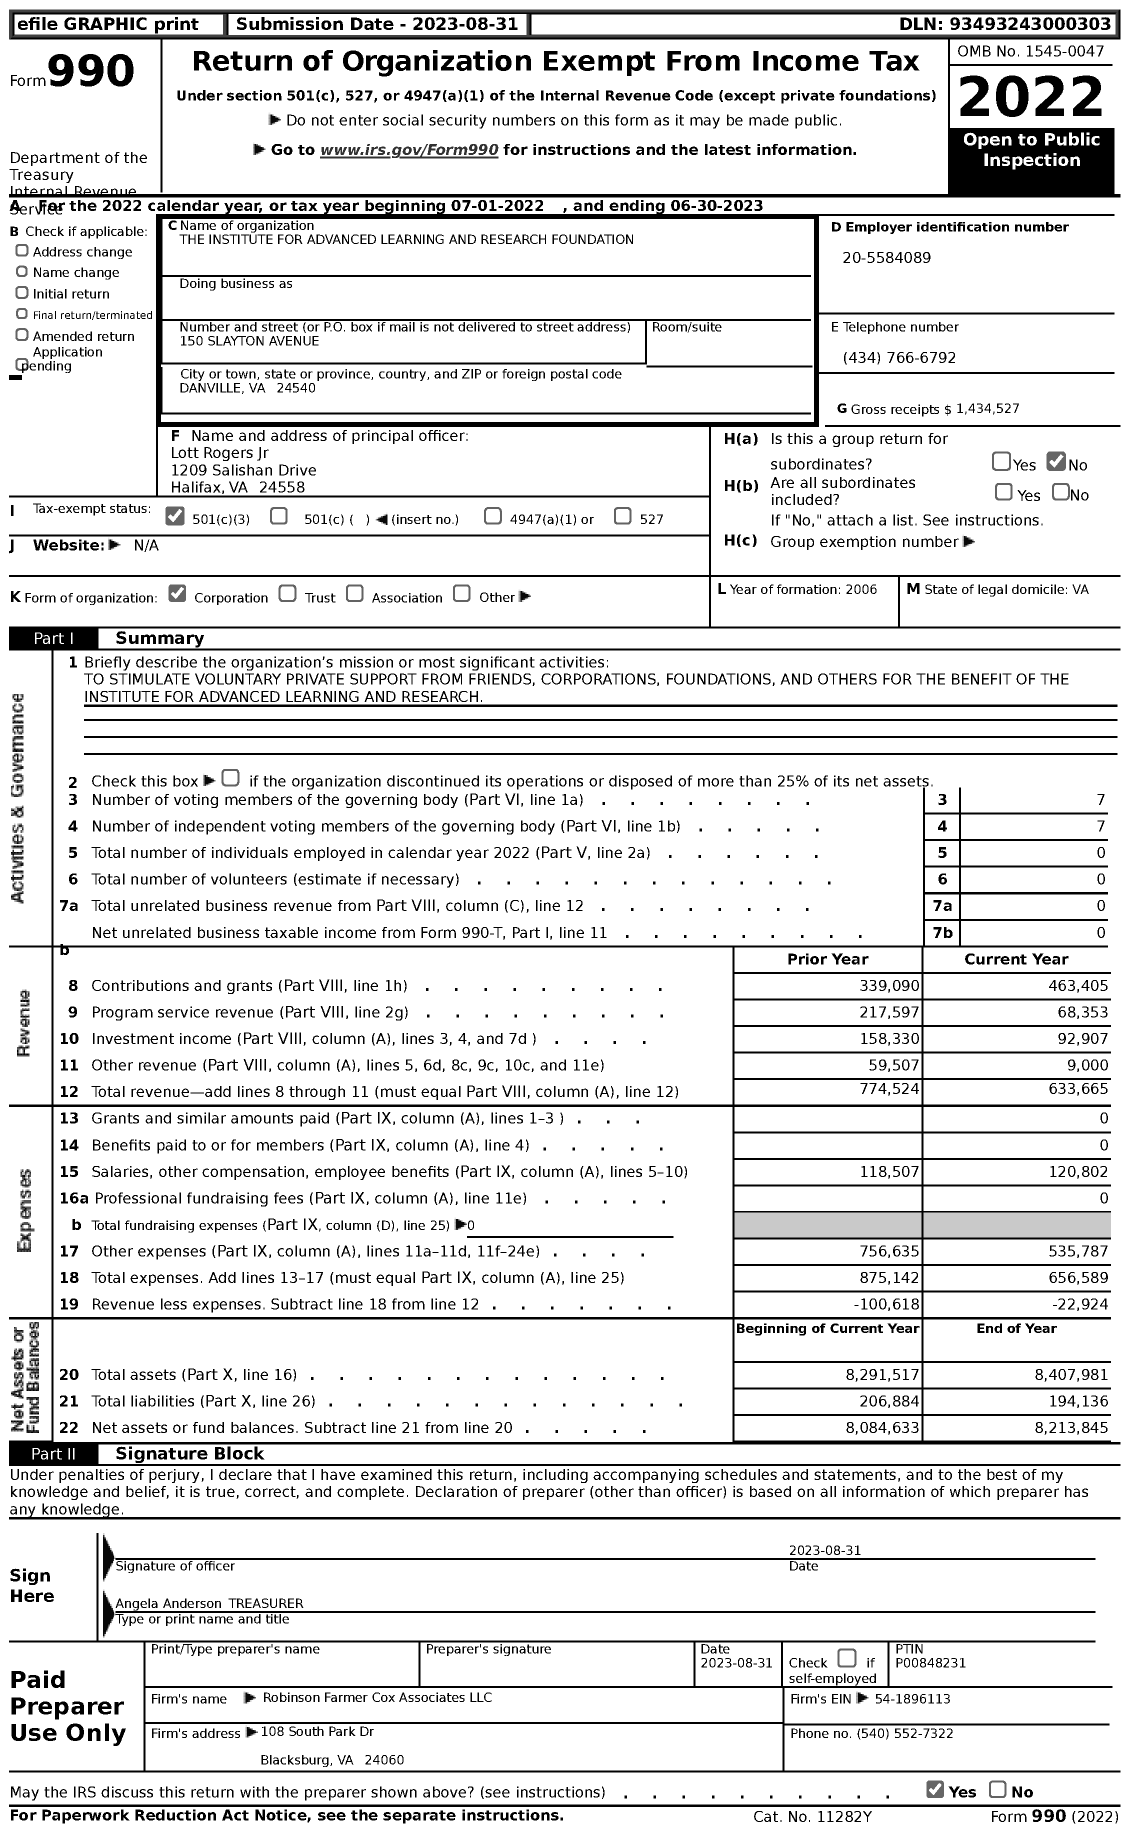 Image of first page of 2022 Form 990 for The Institute for Advanced Learning and Research Foundation